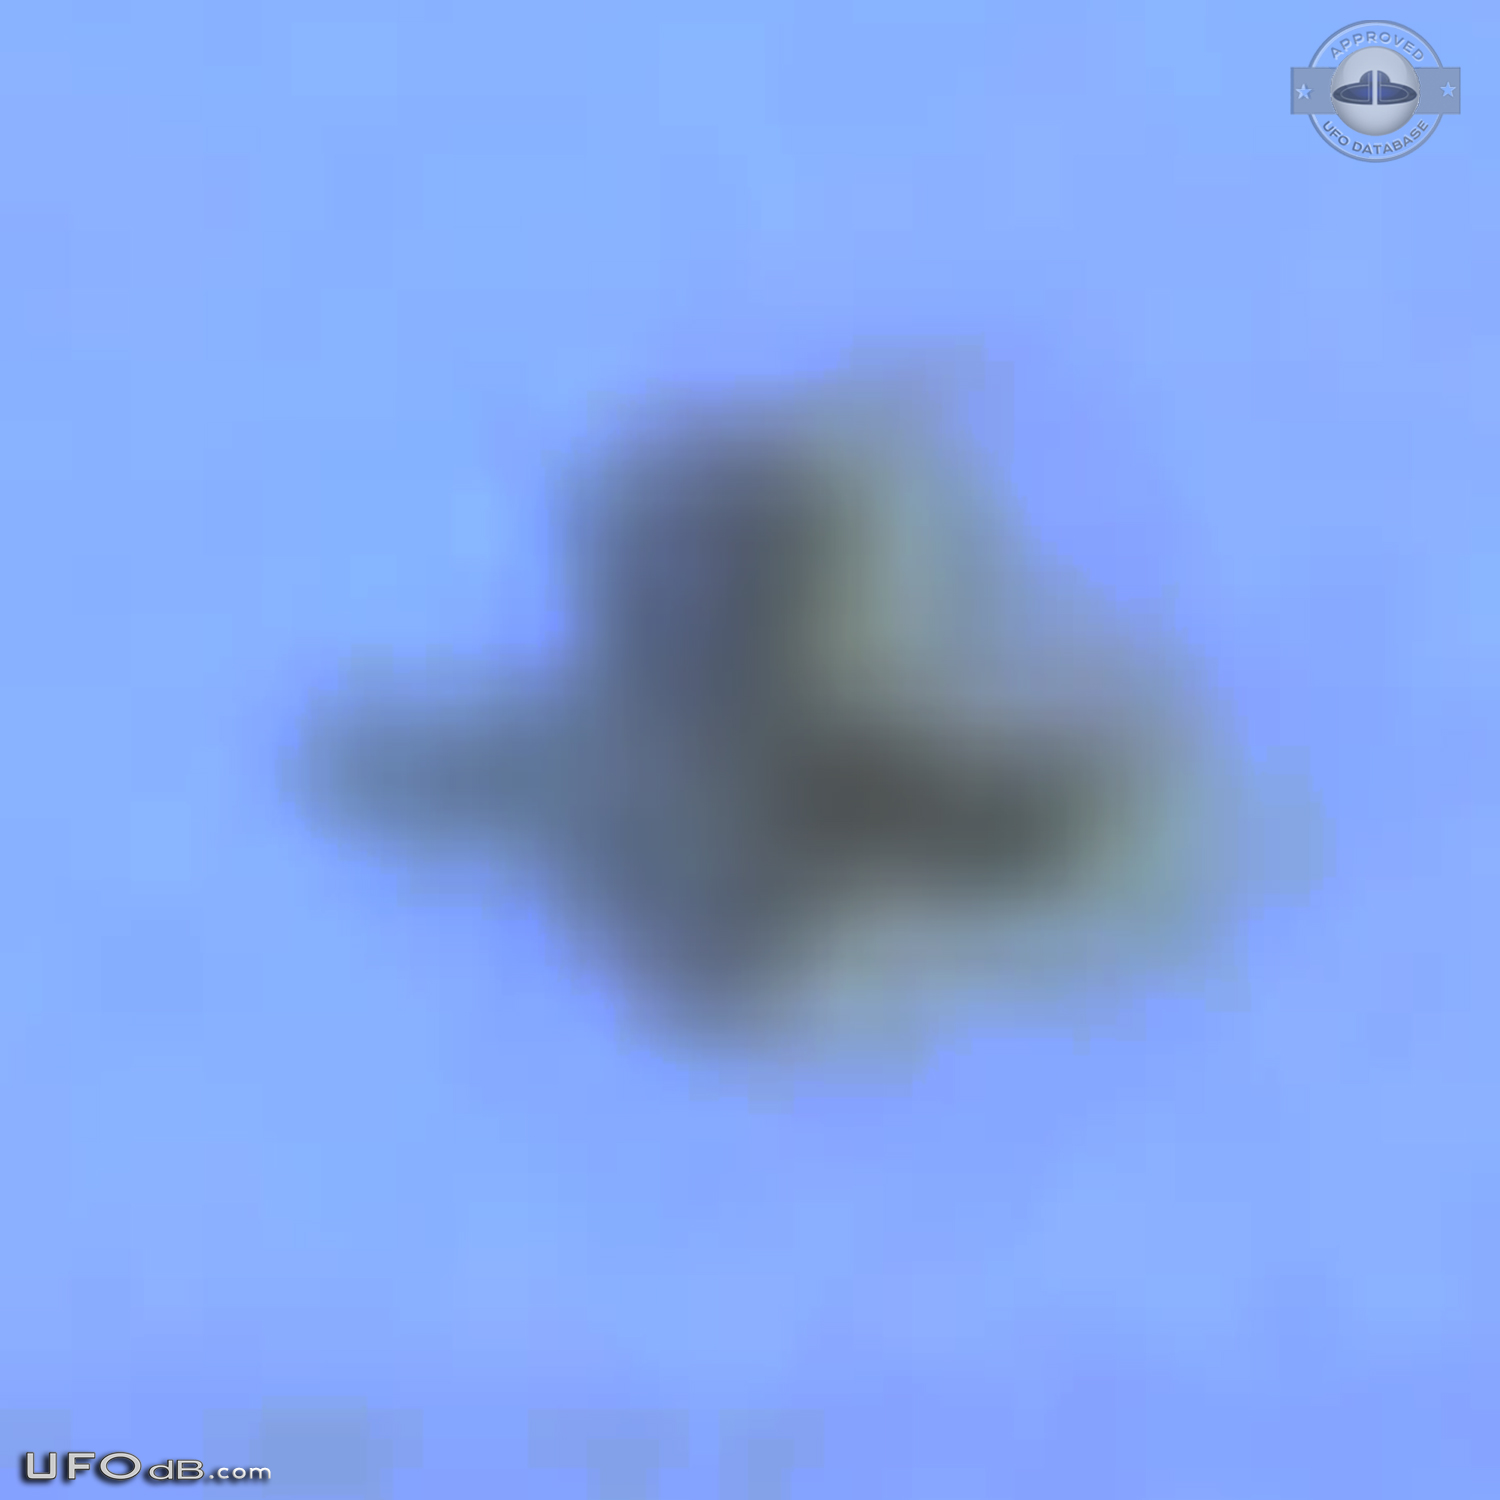 Strange Shaped UFO rarely seen caught on picture Istanbul Turkey 2014 UFO Picture #568-6